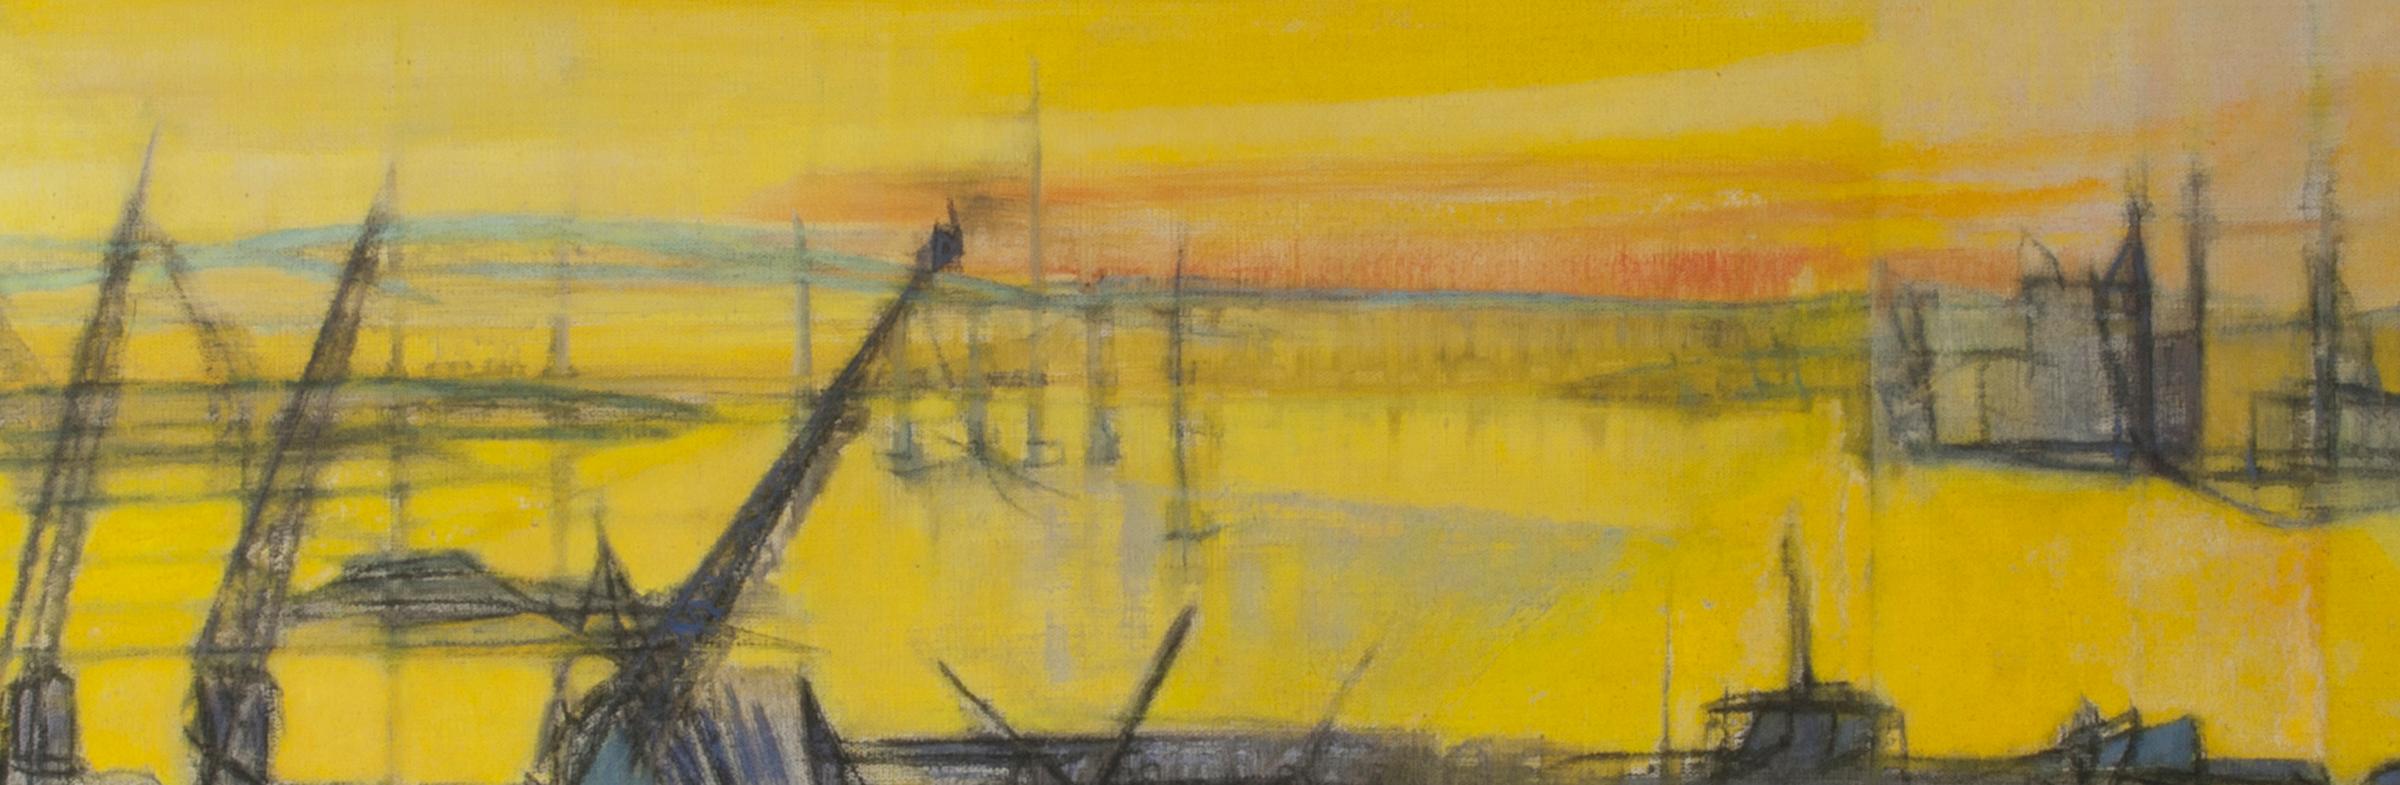 South Hampton 8:45PM - Abstract Painting by Cleve Gray